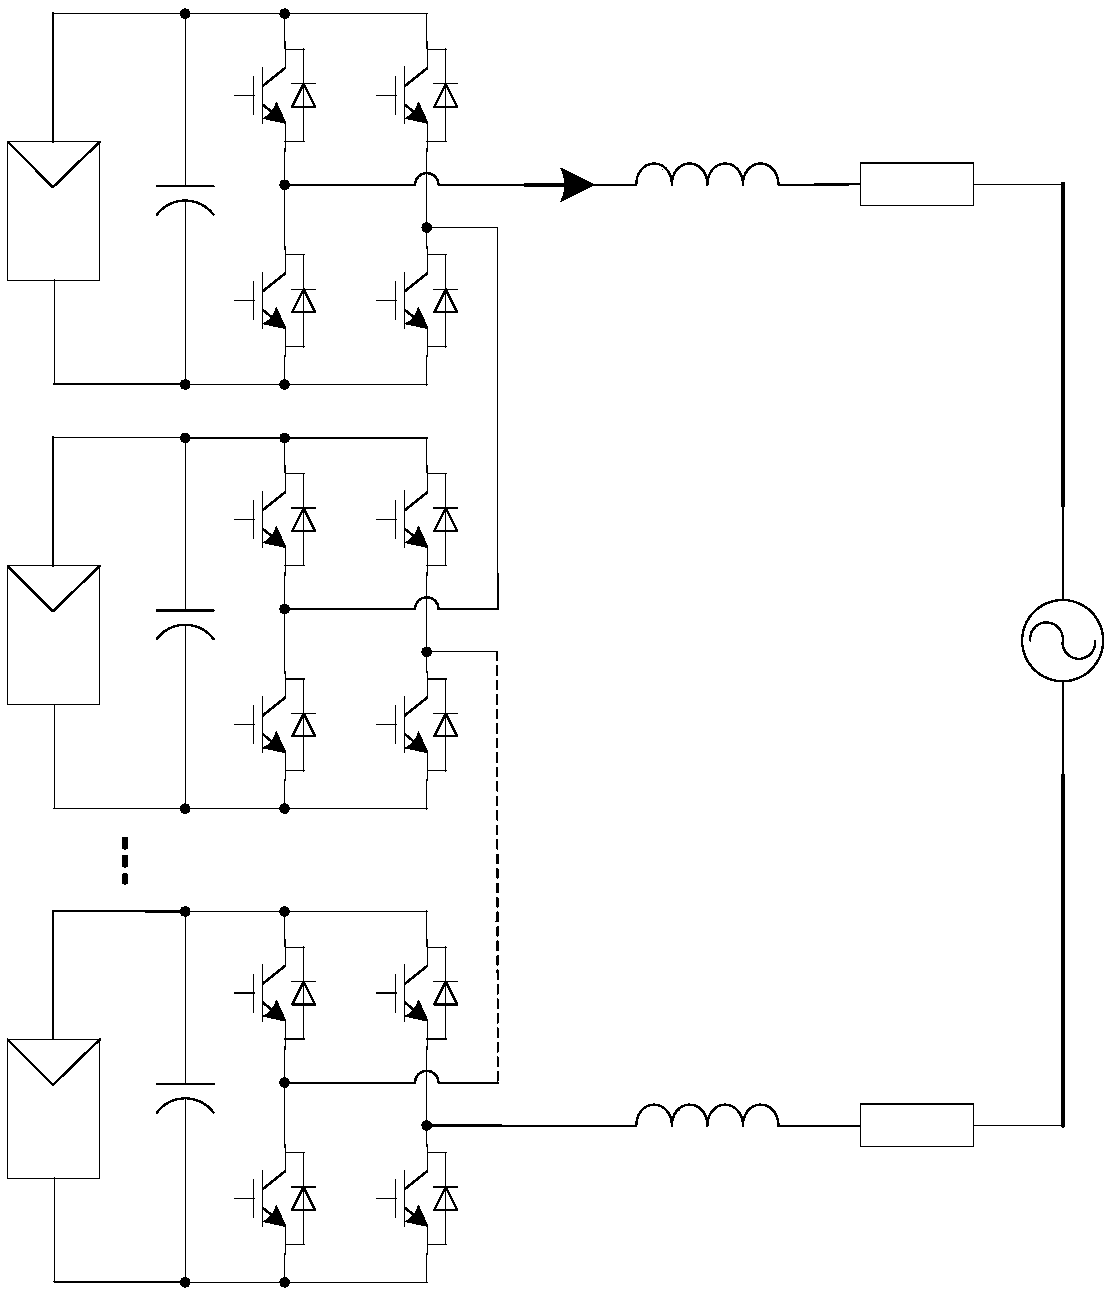 Control method and controller for cascaded H-bridge inverter